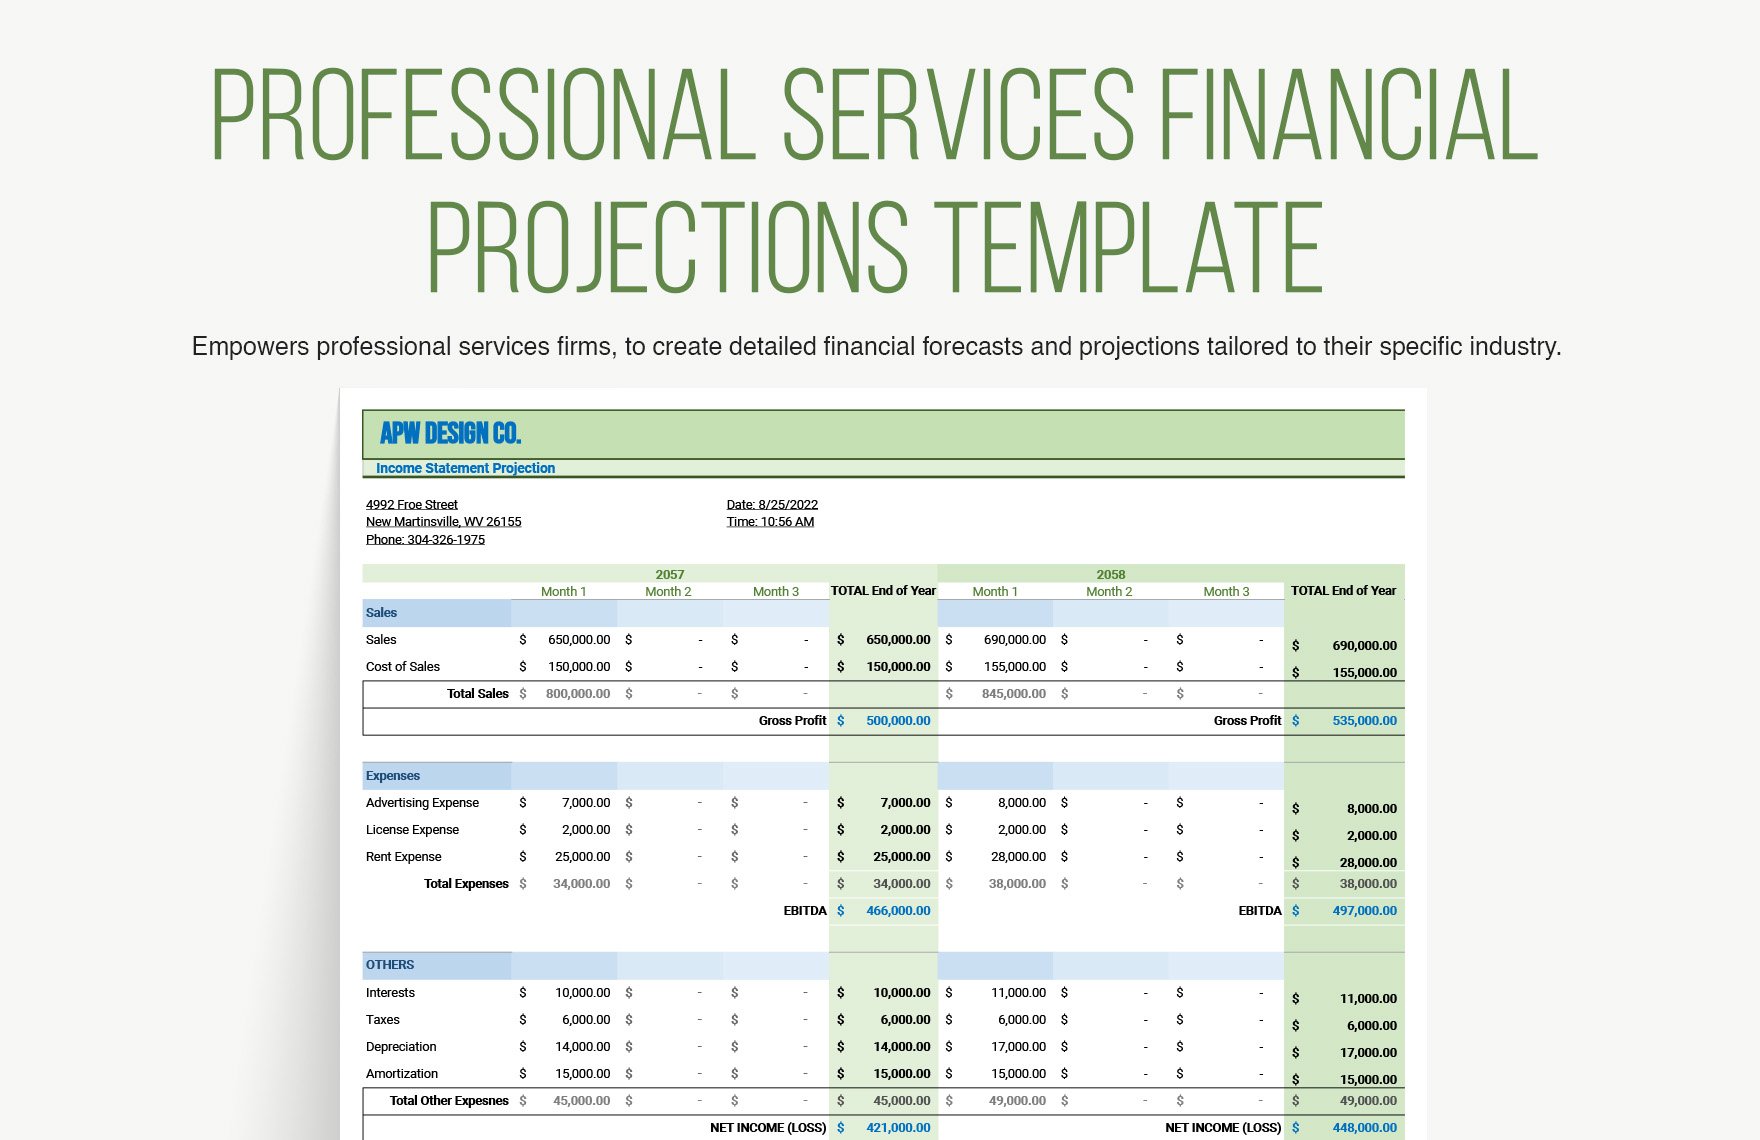 Professional Services Financial Projections Template